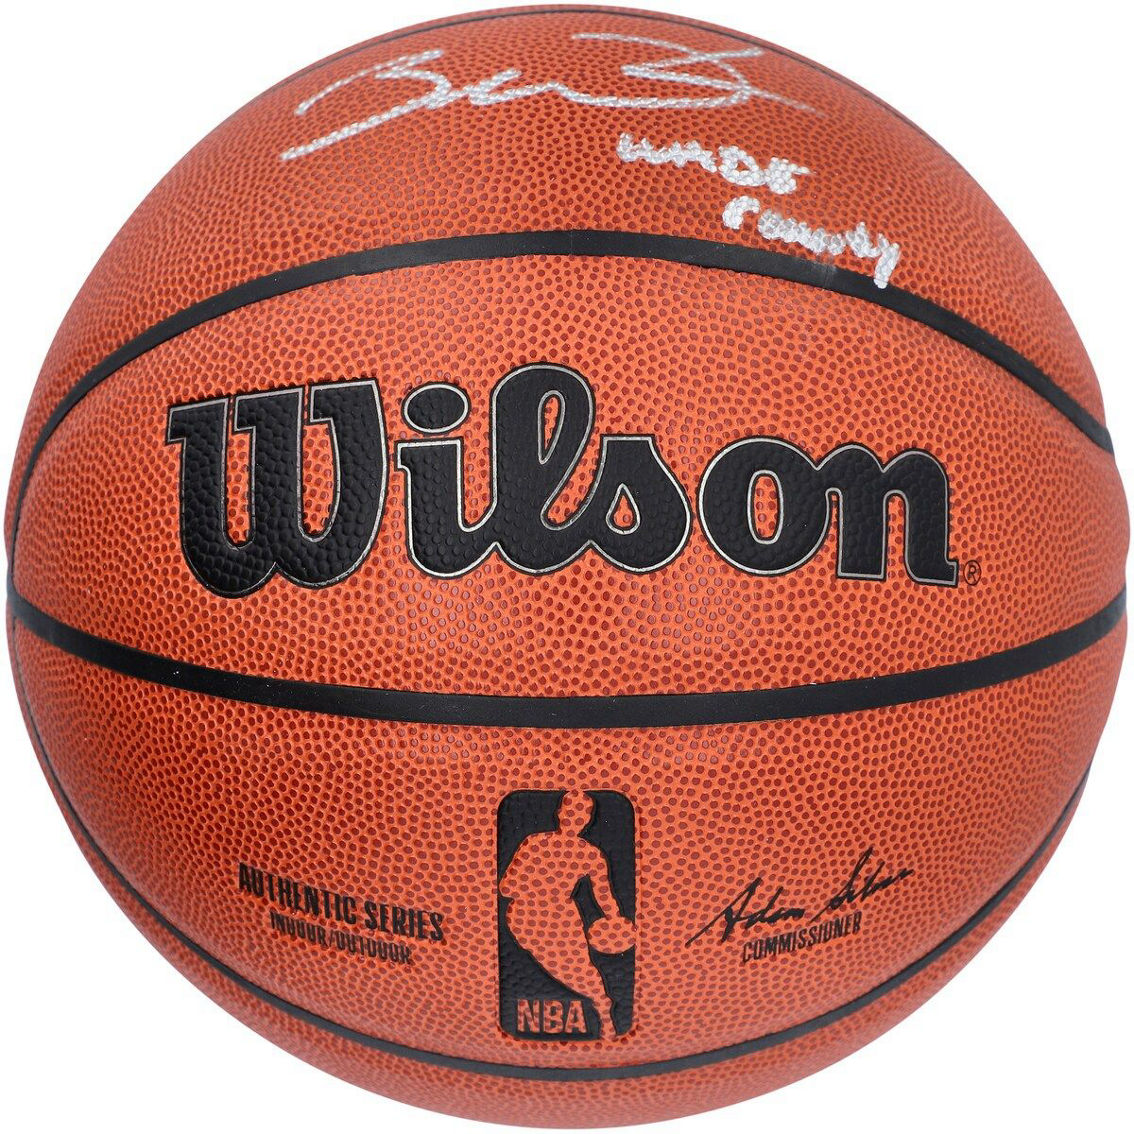 Fanatics Authentic Dwyane Wade Miami Heat Autographed Wilson Authentic Series Indoor/Outdoor Basketball with ''WADE COUNTY'' Inscription - Image 3 of 3